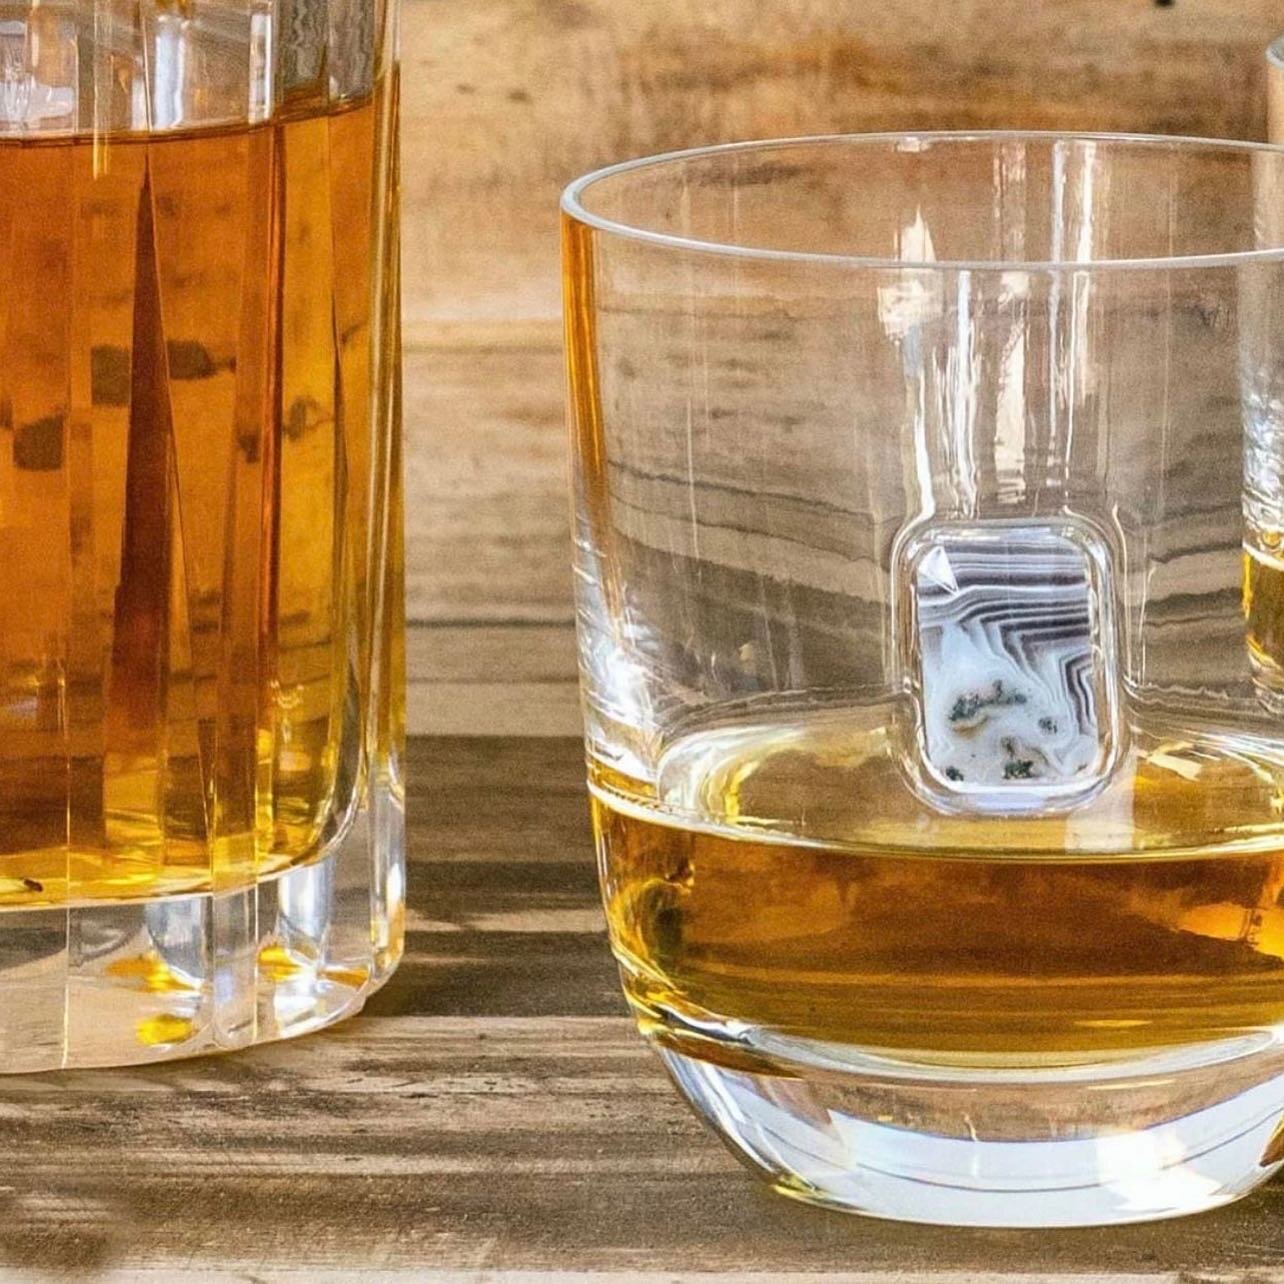 Make your cocktail hour standout 🥃

The Elevo Gemstone Double Old Fashioned Glasses are designed to elevate the experience of your favorite whiskey. 

Expertly crafted from lead-free European crystal, they are set with princess-cut, semi-precious ge